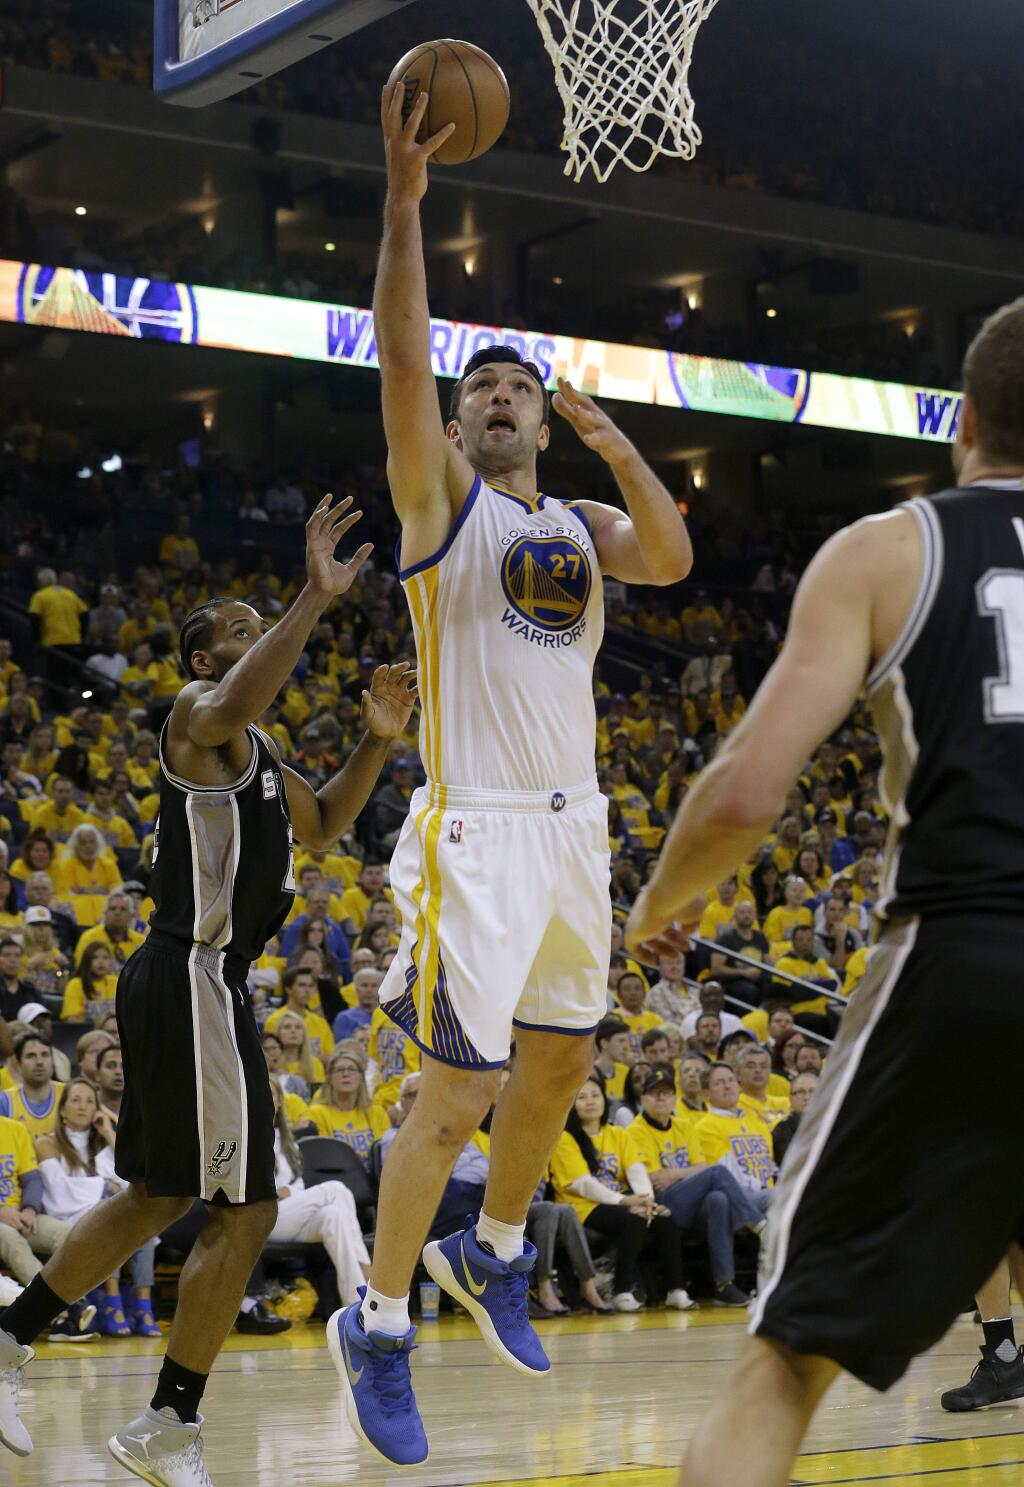 Golden State Warriors center Zaza Pachulia shoots against the San Antonio Spurs during Game 1 of the NBA Western Conference finals in Oakland, Sunday, May 14, 2017. (AP Photo/Jeff Chiu)